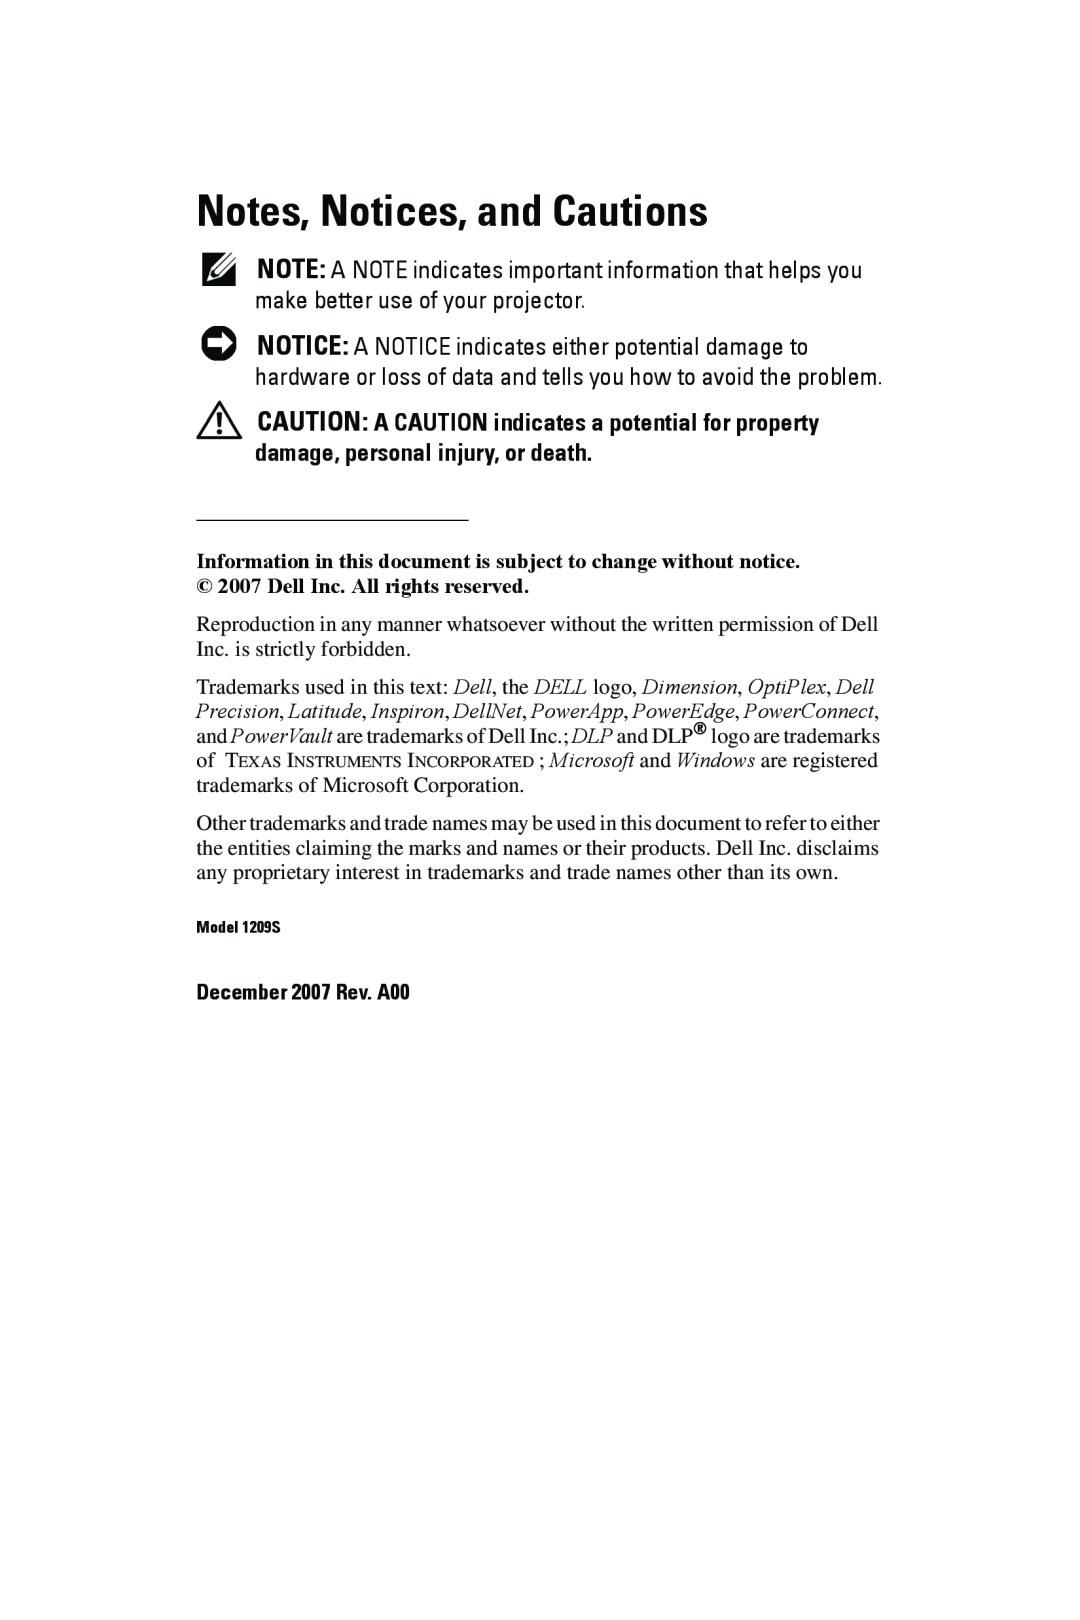 Dell manual Notes, Notices, and Cautions, trademarks of Microsoft Corporation, December 2007 Rev. A00, Model 1209S 